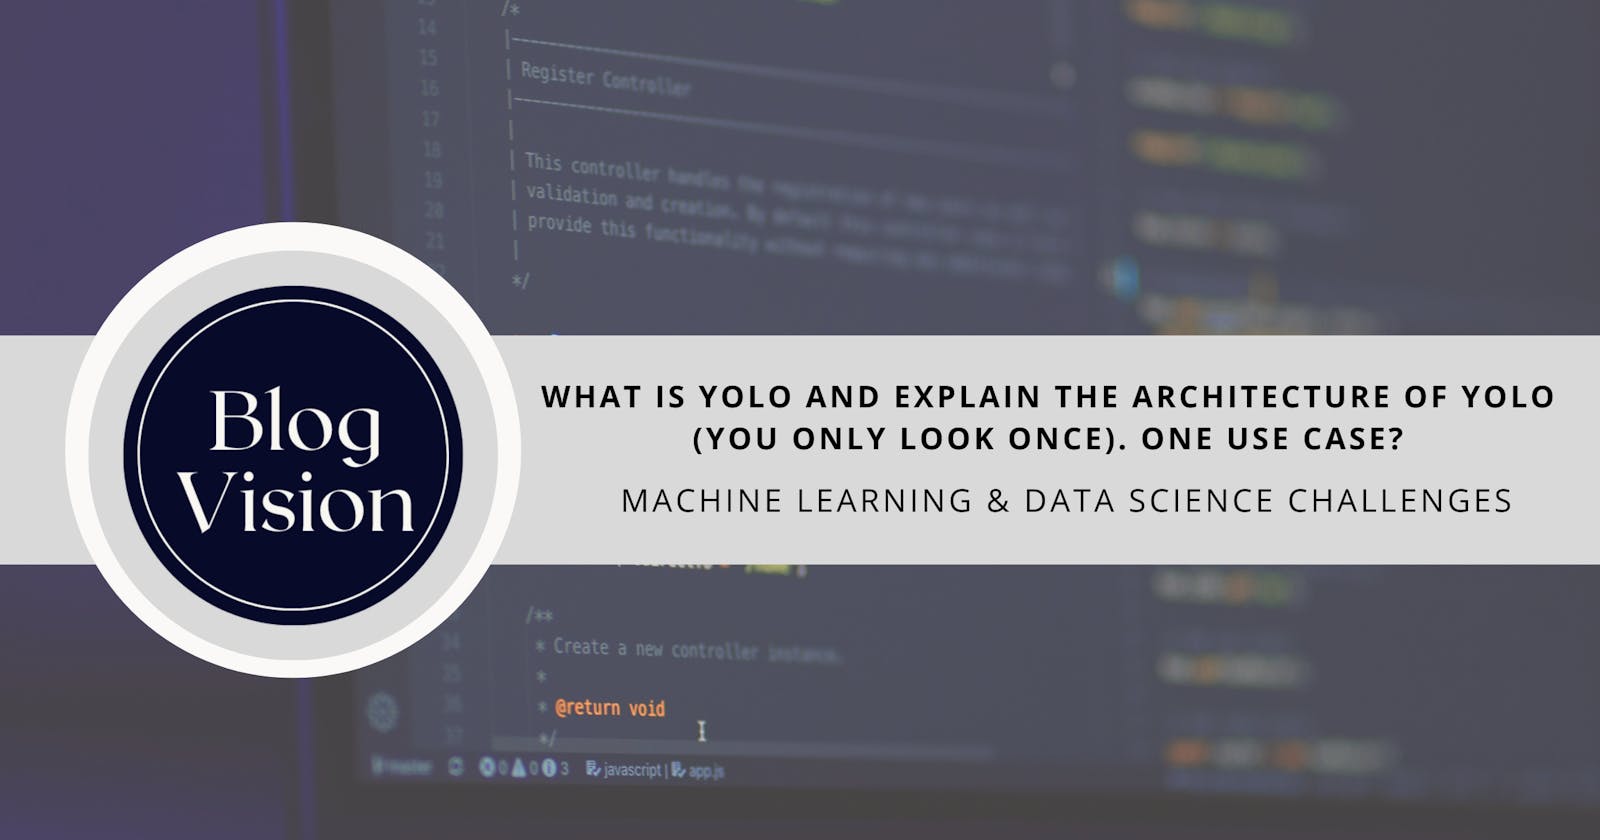 #80 Machine Learning & Data Science Challenge 80